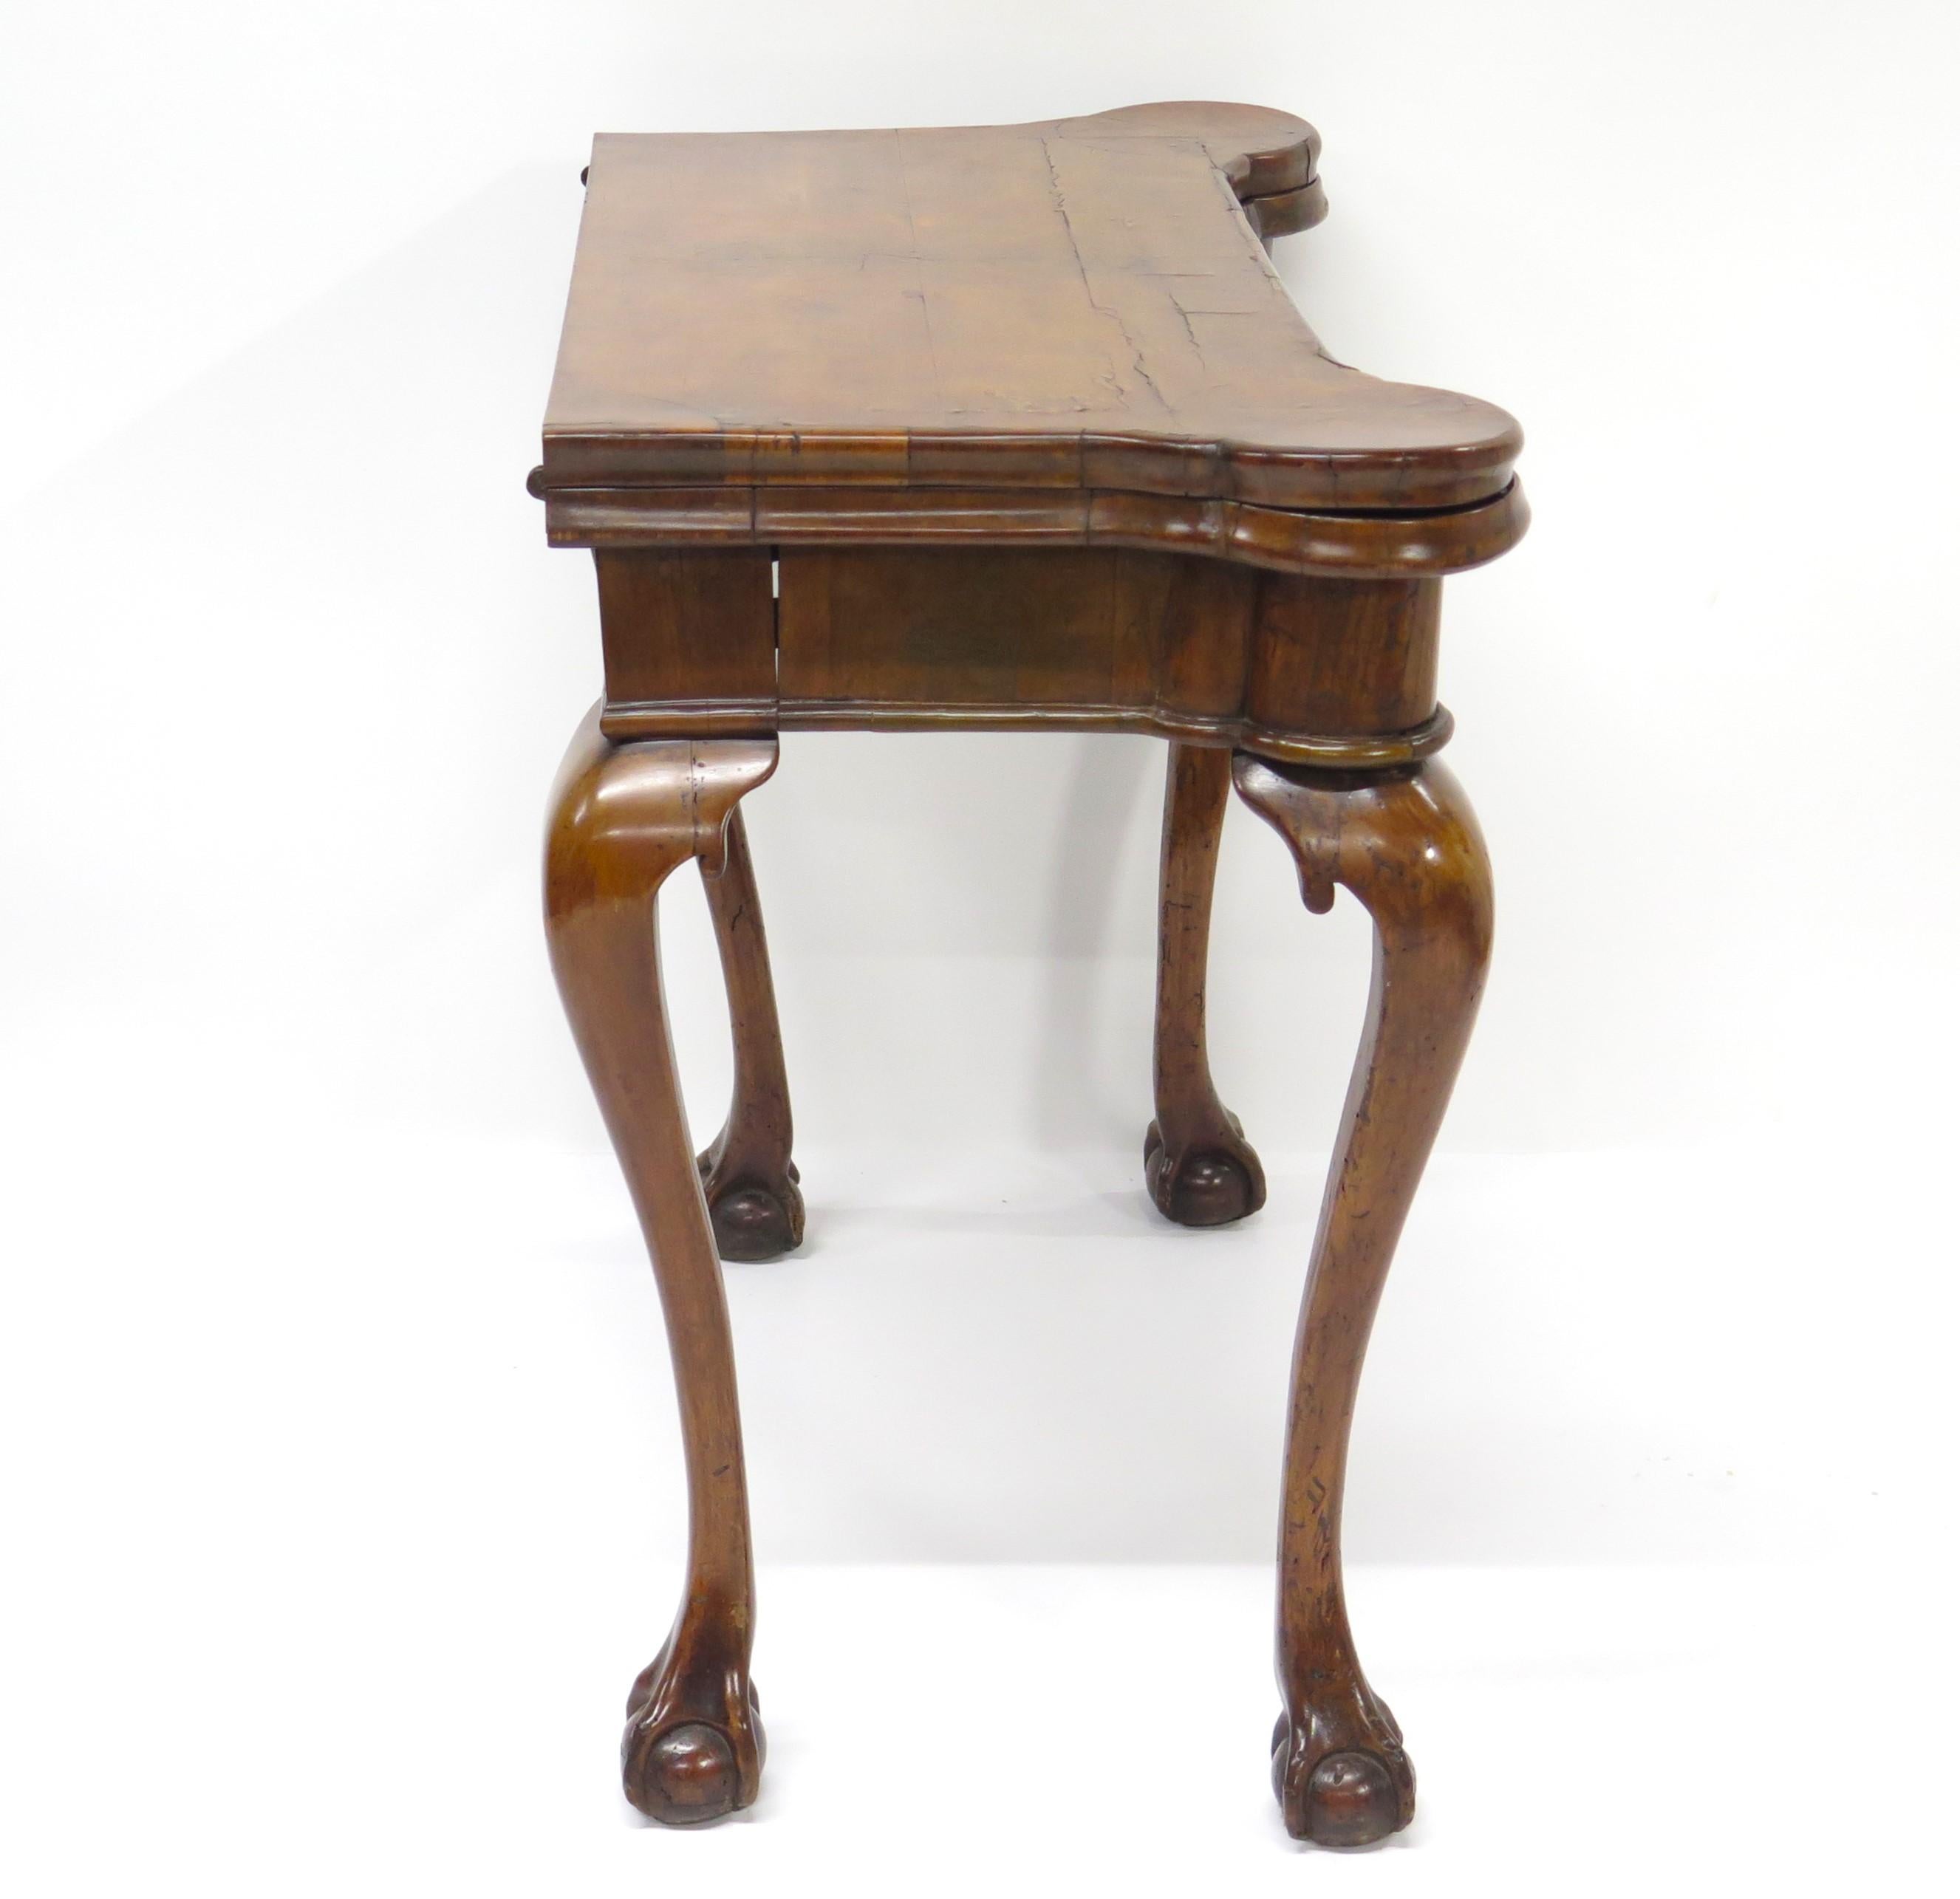 George II carved walnut card/games table that doubles as a side table when not in use. The fold over outset shaped top opens to reveal a baize lined playing surface with candle stands and guinea wells . Elegantly curved legs ending in a ball and